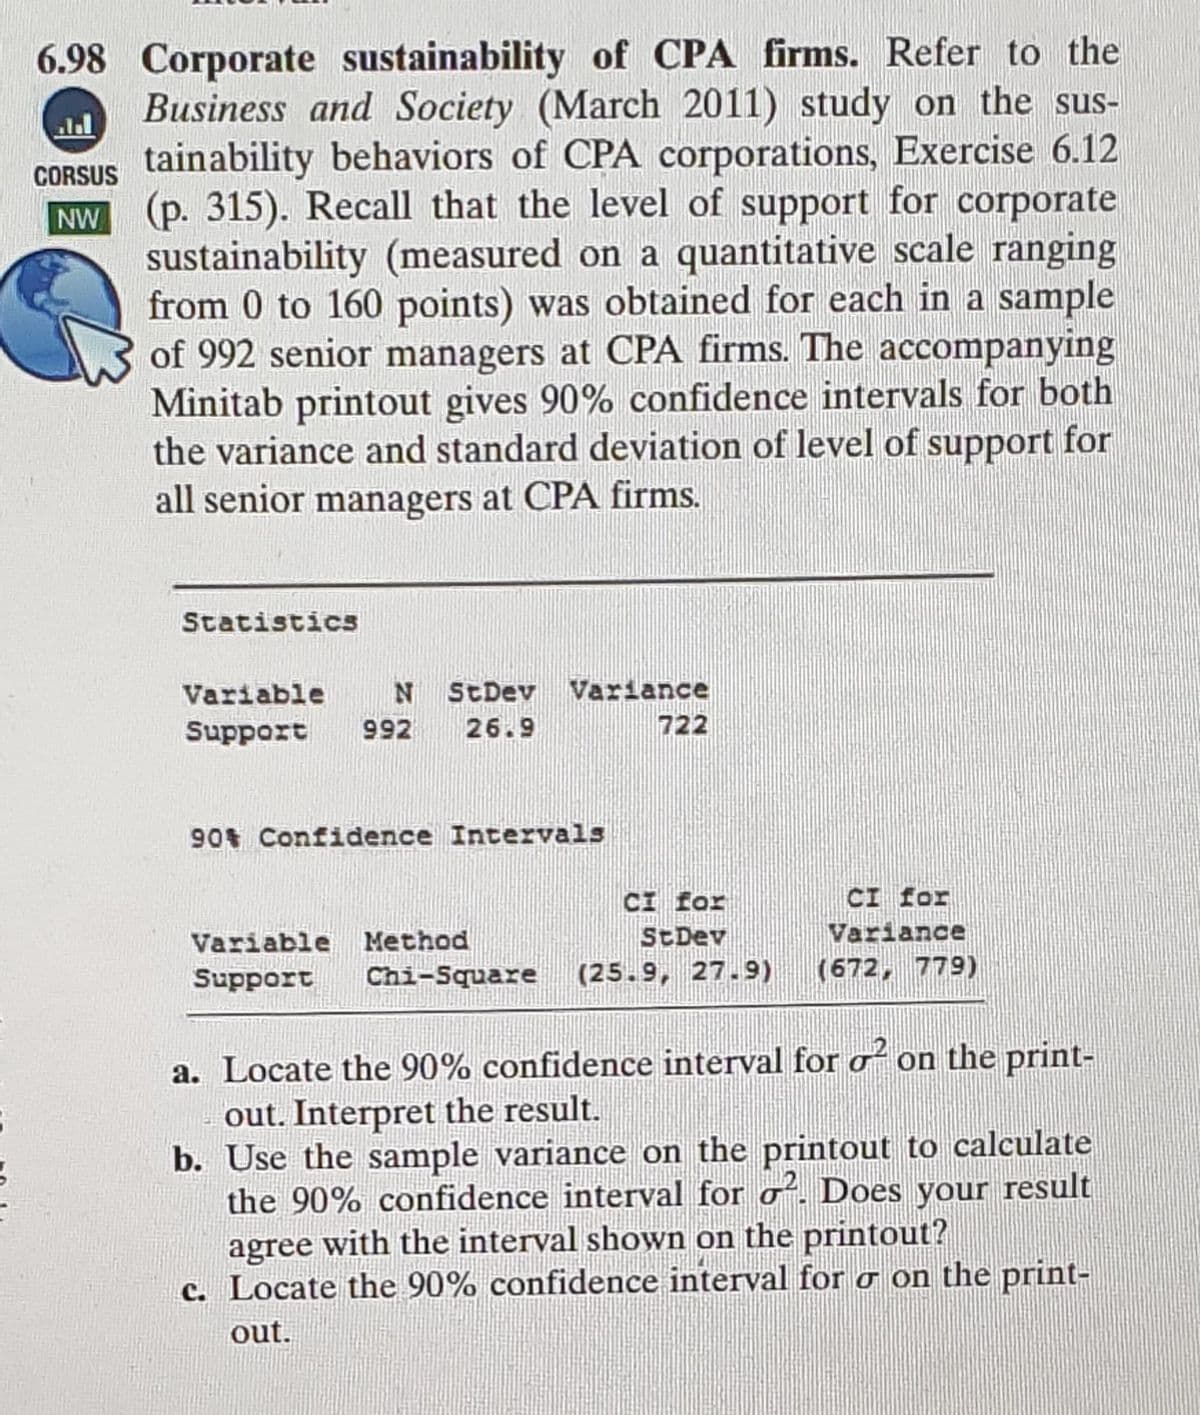 6.98 Corporate sustainability of CPA firms. Refer to the
Business and Society (March 2011) study on the sus-
CORSUS tainability behaviors of CPA corporations, Exercise 6.12
NW (p. 315). Recall that the level of support for corporate
sustainability (measured on a quantitative scale ranging
from 0 to 160 points) was obtained for each in a sample
of 992 senior managers at CPA firms. The accompanying
Minitab printout gives 90% confidence intervals for both
the variance and standard deviation of level of support for
all senior managers at CPA firms.
Statistics
Variable
StDev Variance
Support
992
26.9
722
90 Confidence Intervals
CI for
CI for
Variable Method
StDev
Variance
Support
Chi-Square
(25.9, 27.9)
(672, 779)
a. Locate the 90% confidence interval for o on the print-
out. Interpret the result.
b. Use the sample variance on the printout to calculate
the 90% confidence interval for o. Does your result
agree with the interval shown on the printout?
c. Locate the 90% confidence interval for o on the print-
out.
